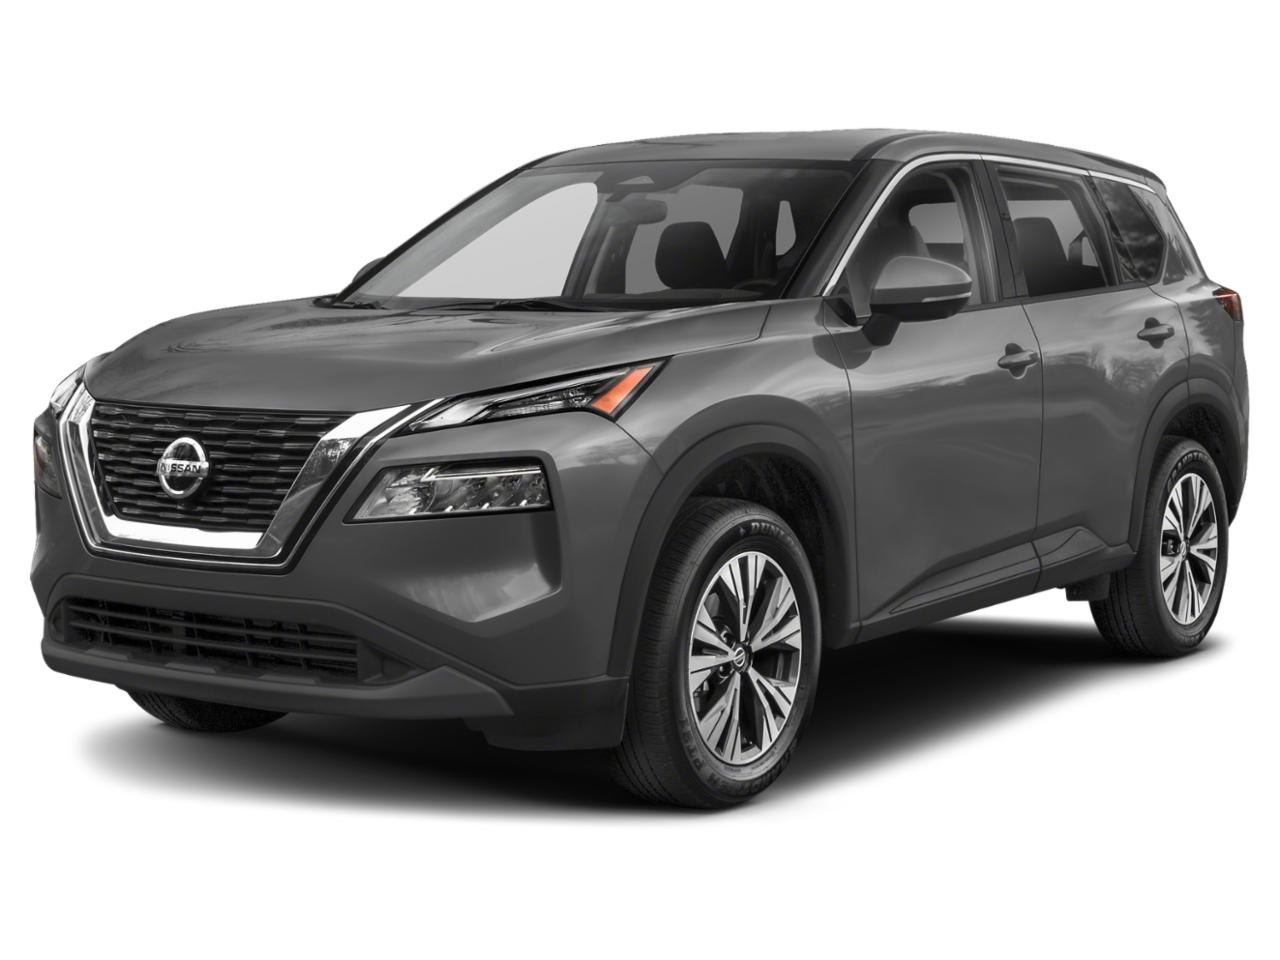 2022 Nissan Rogue Vehicle Photo in Denison, TX 75020